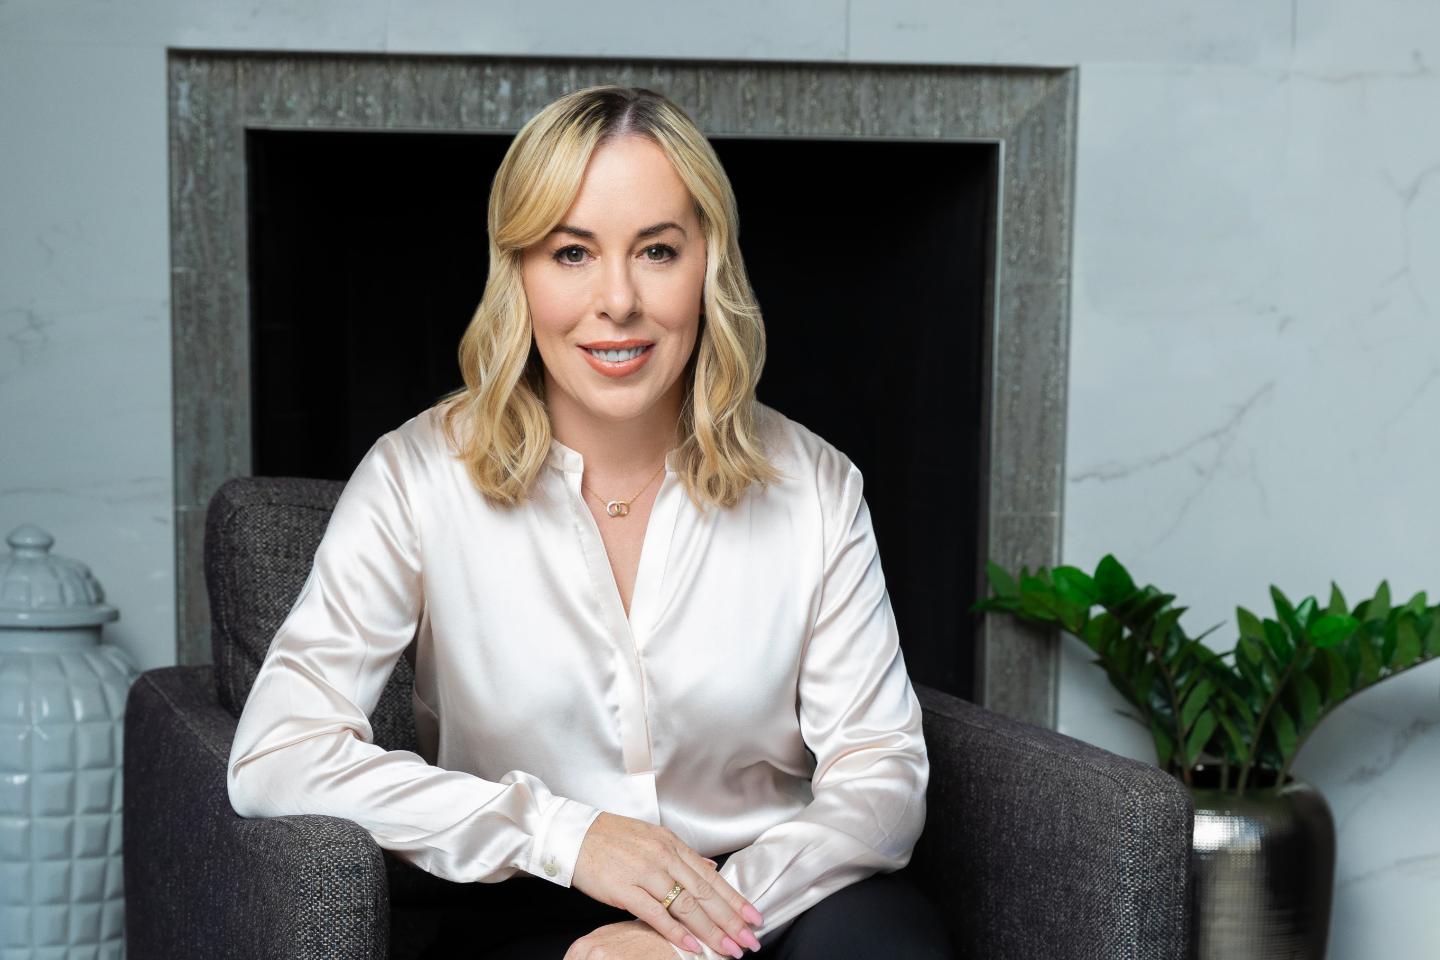 CEO Amy McKenna wearing a white blouse with her hands crossed, sitting in a grey armchair and smiling at the camera